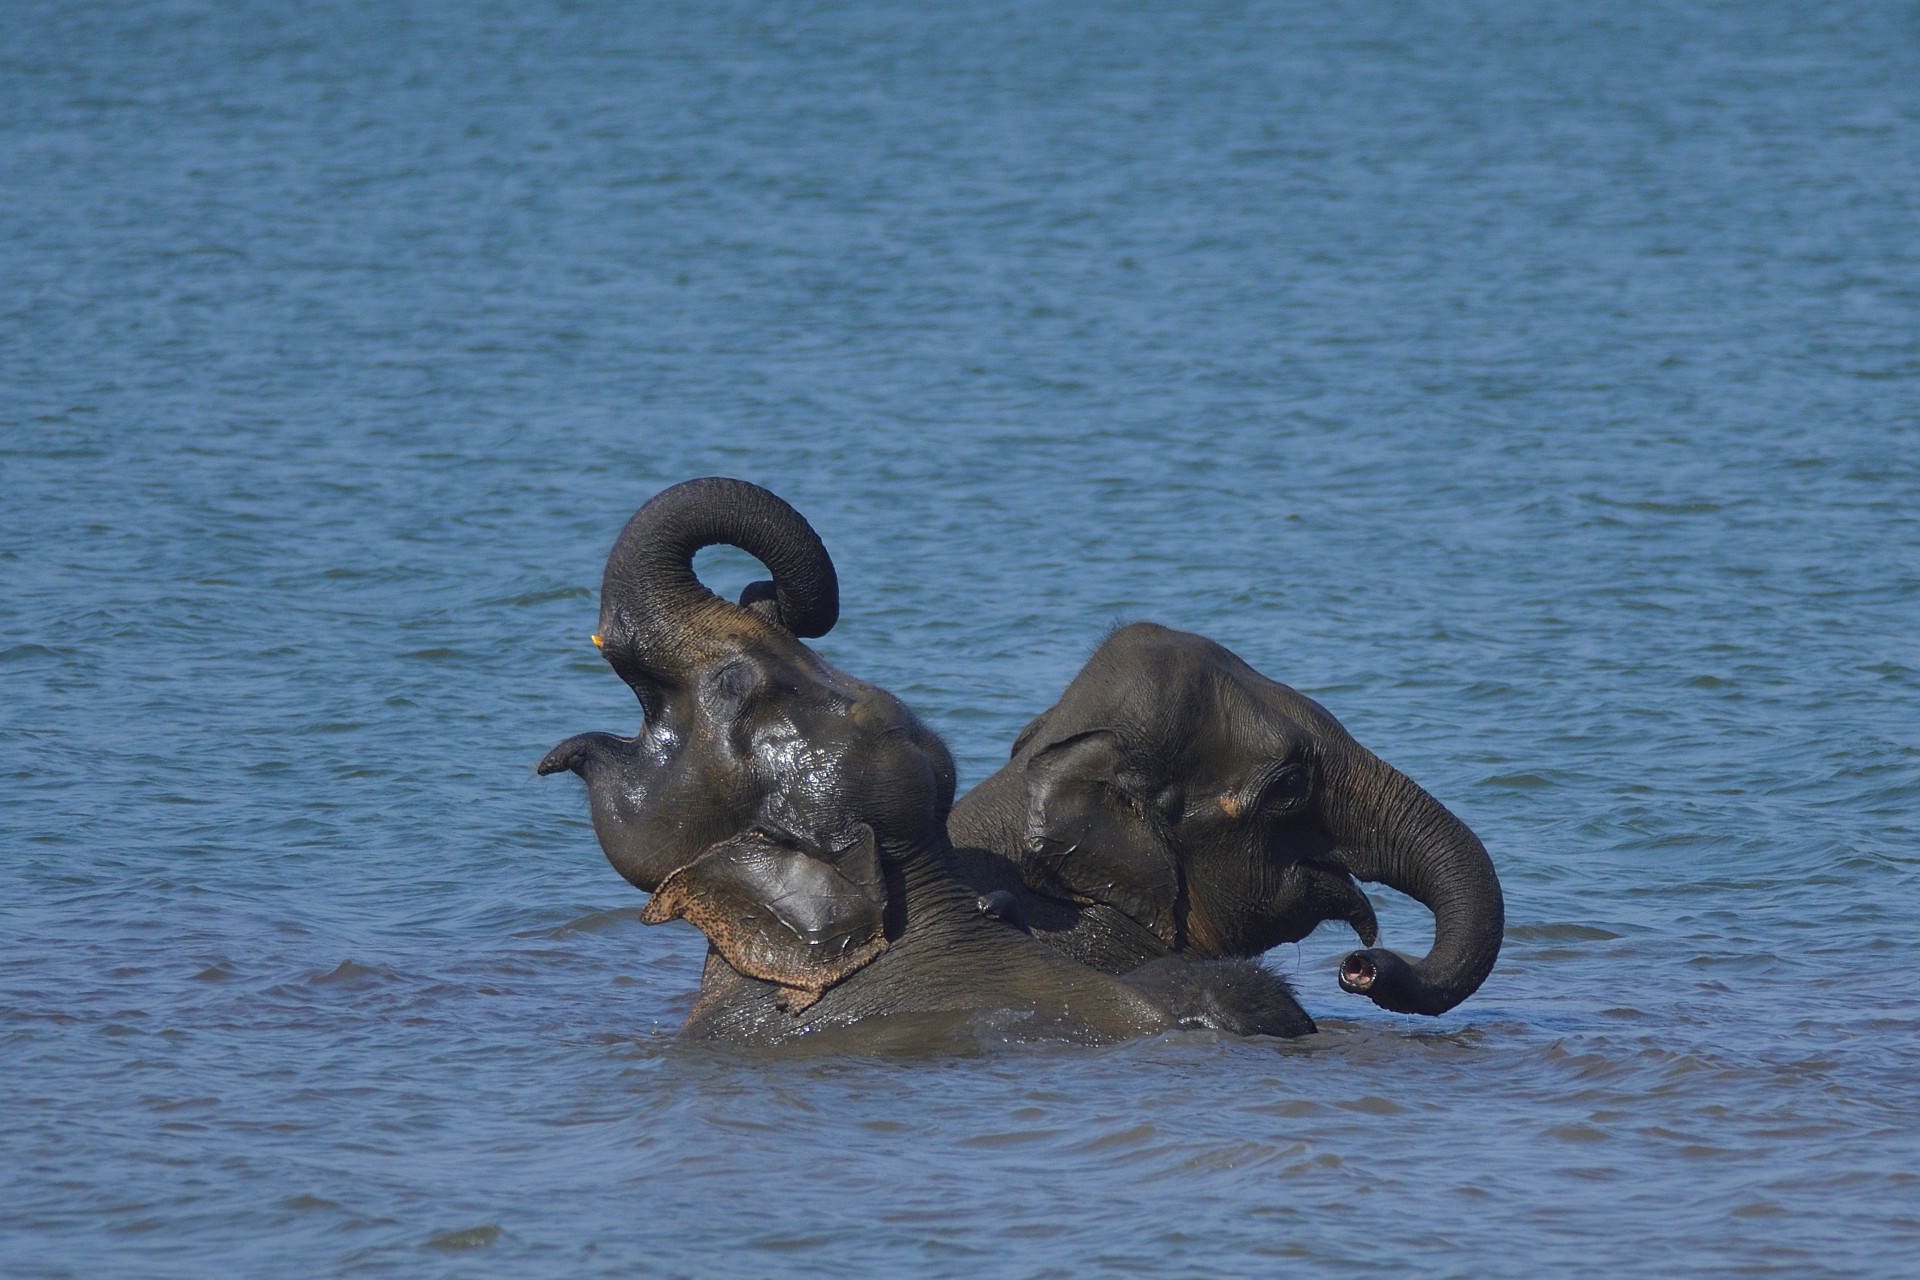 Elephant playing in water